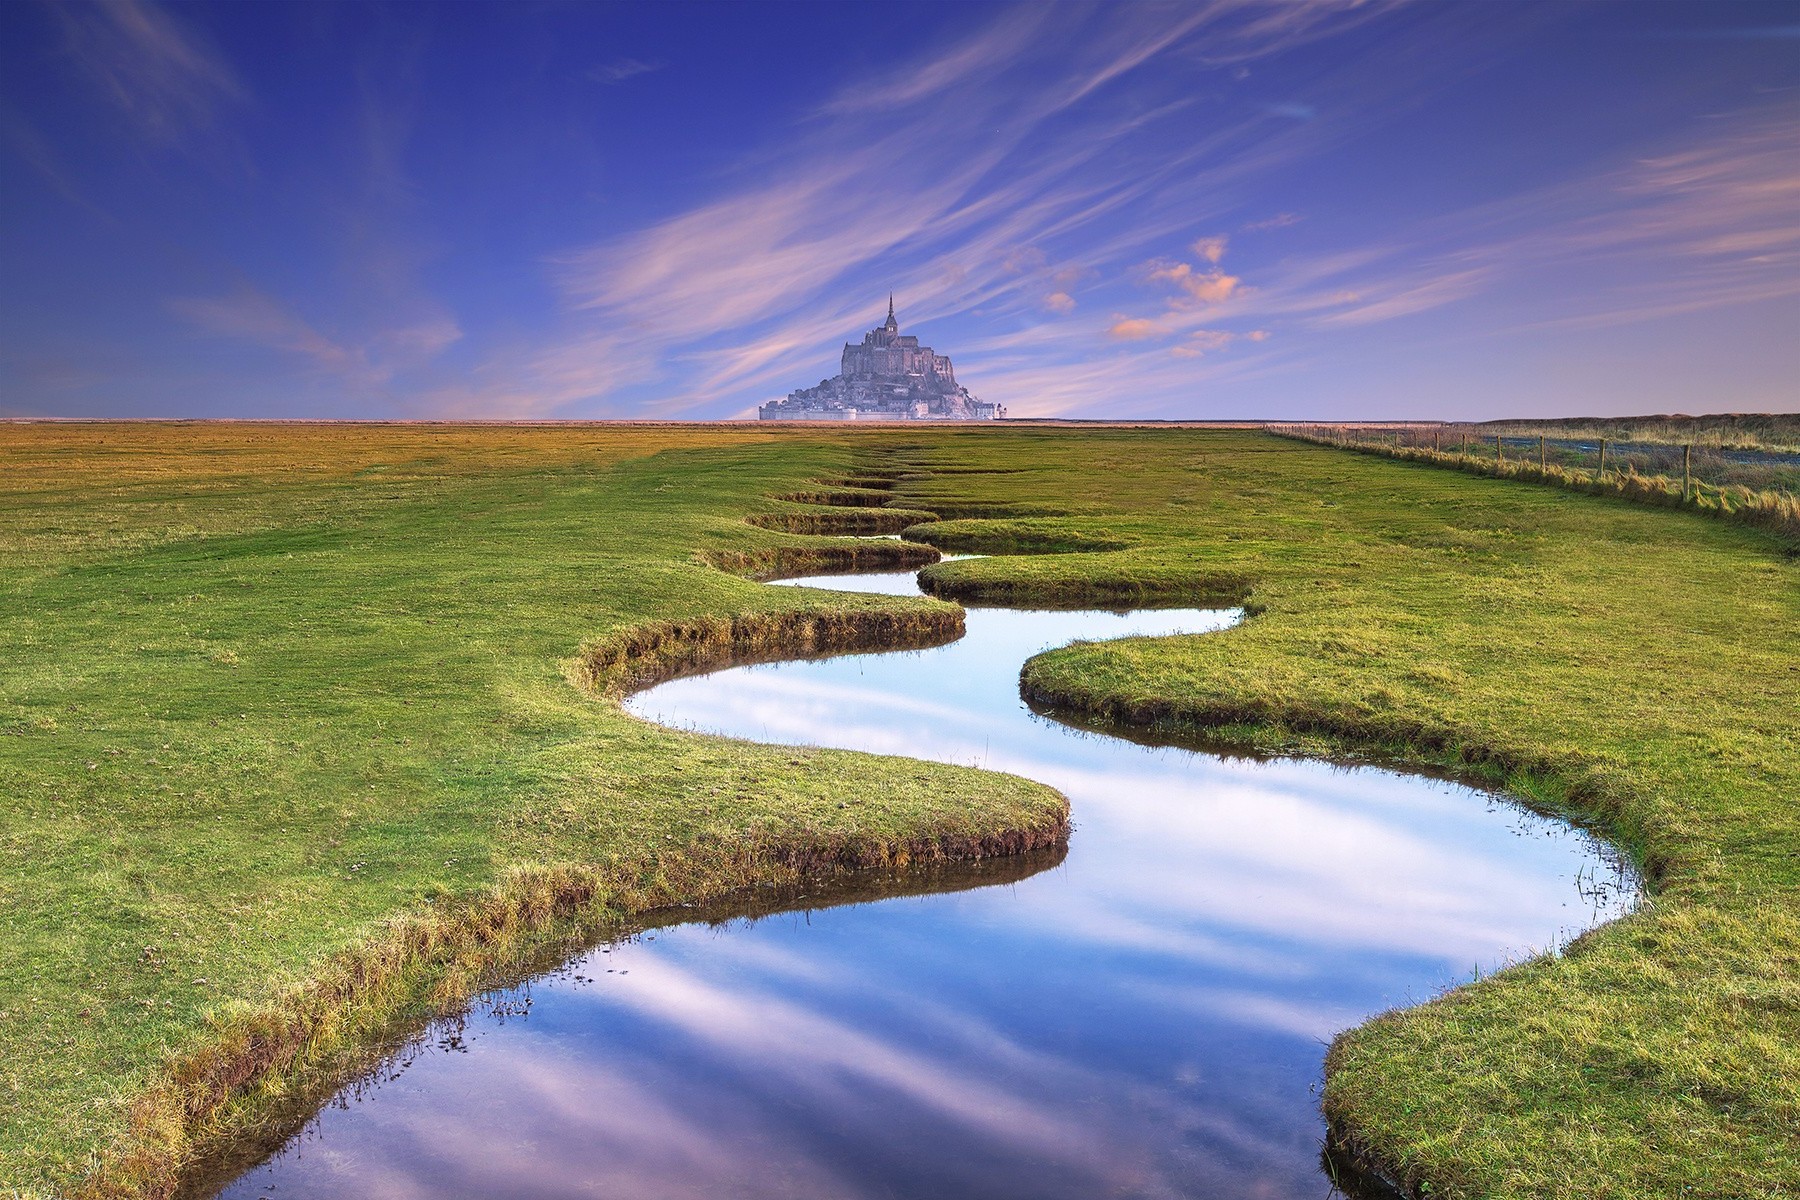 river, Nature, Landscape, Field, Grass, Stream, Photo Manipulation, Normandia, France, Architecture, Castle, Horizon, Fence, Clouds, Hill, Reflection, Water Wallpaper